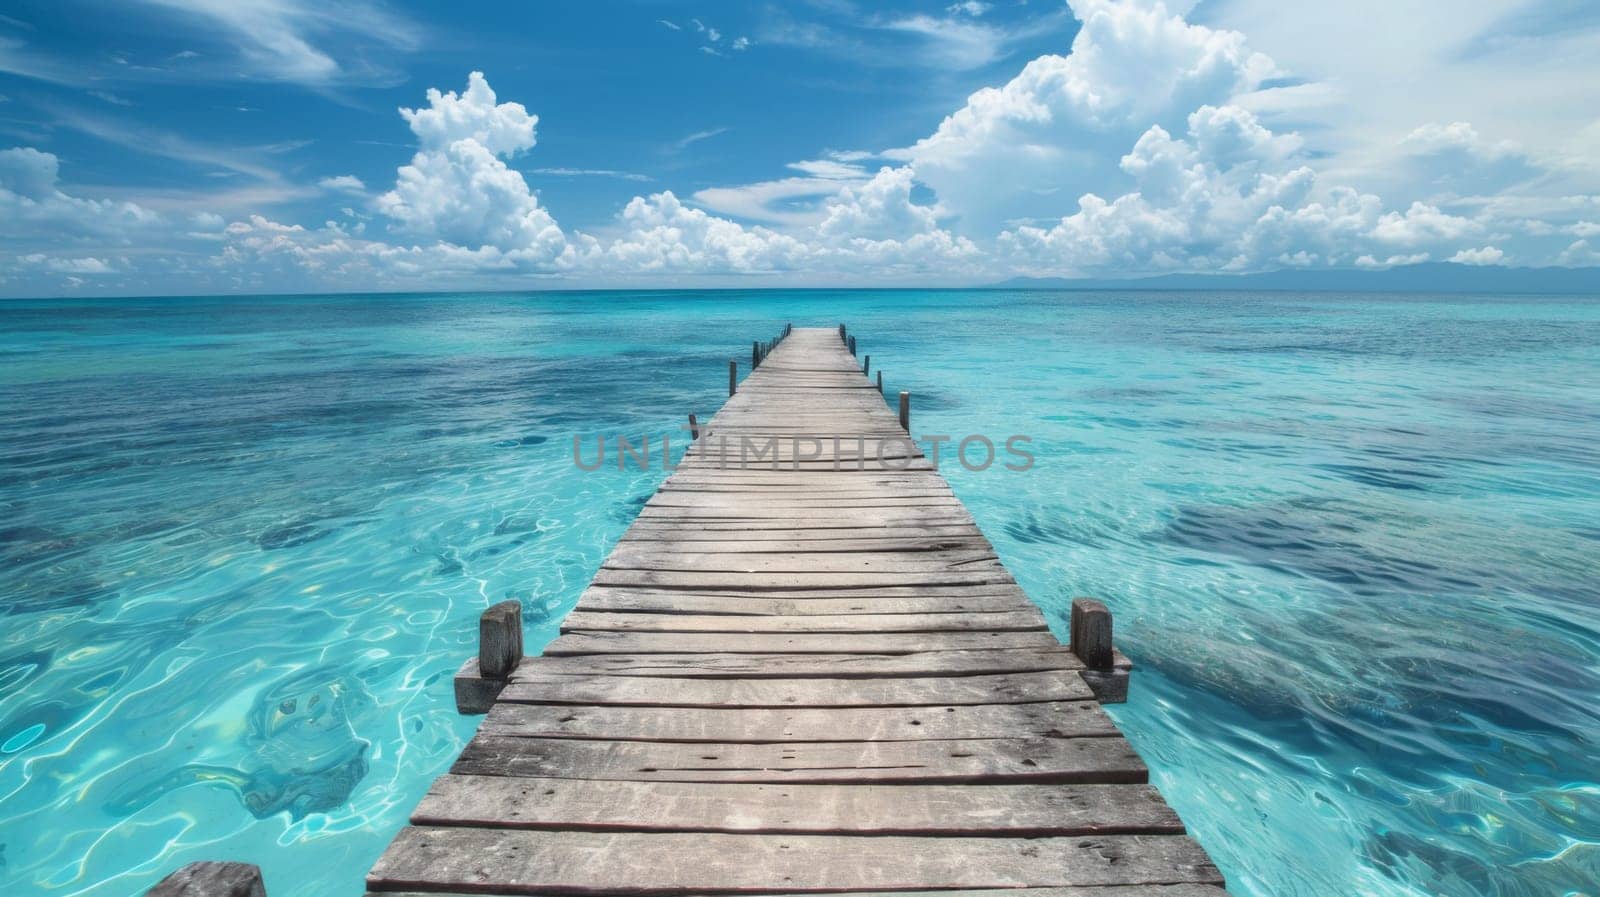 A wooden pier leading into the ocean with clouds in the sky, AI by starush